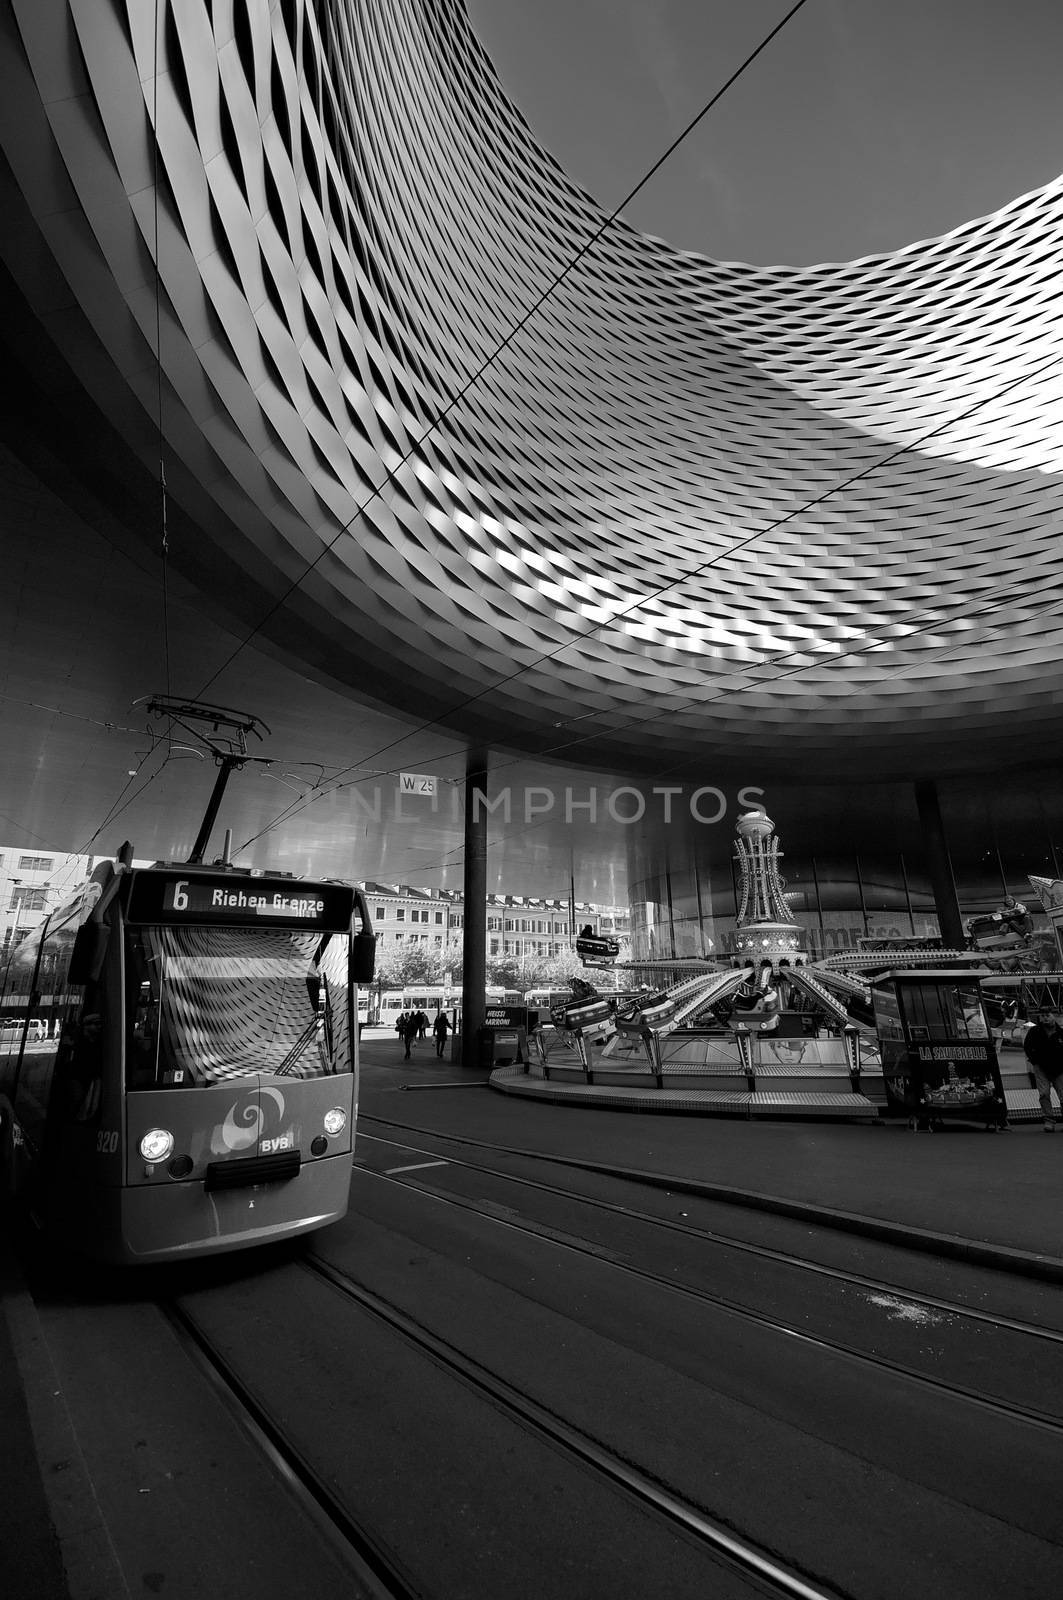 BASEL, SWITZERLAND - NOVEMBER 01 2014: Exhibition Center in the Old Town of Basel in Switzerland